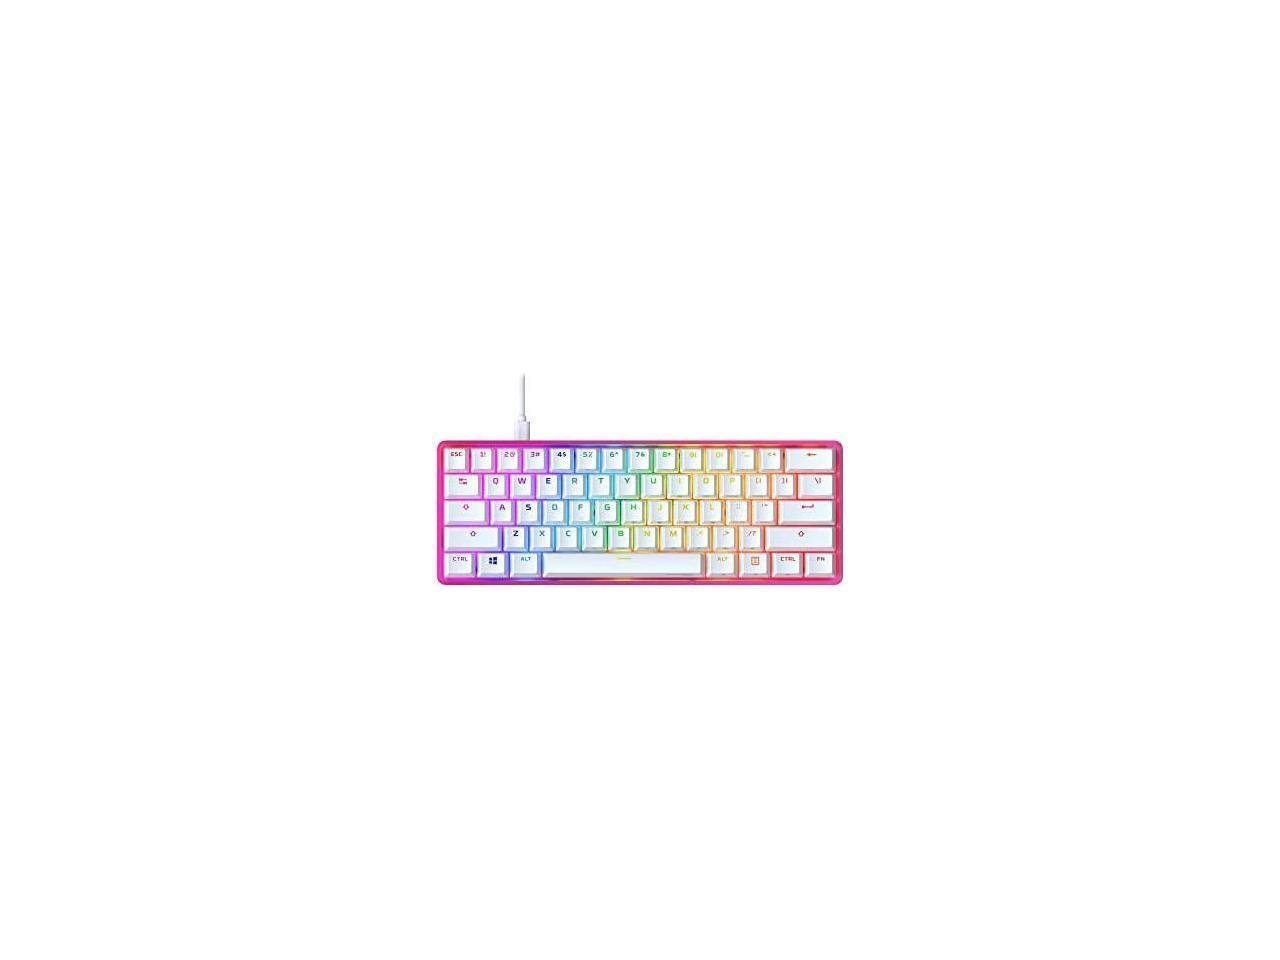 HyperX Alloy Origins 60 - Mechanical Gaming Keyboard - Ultra Compact 60% Form Factor - Linear Red Switch - Double Shot PBT Keycaps - RGB Led Backlit - Ngenuity Software Compatible - Pink